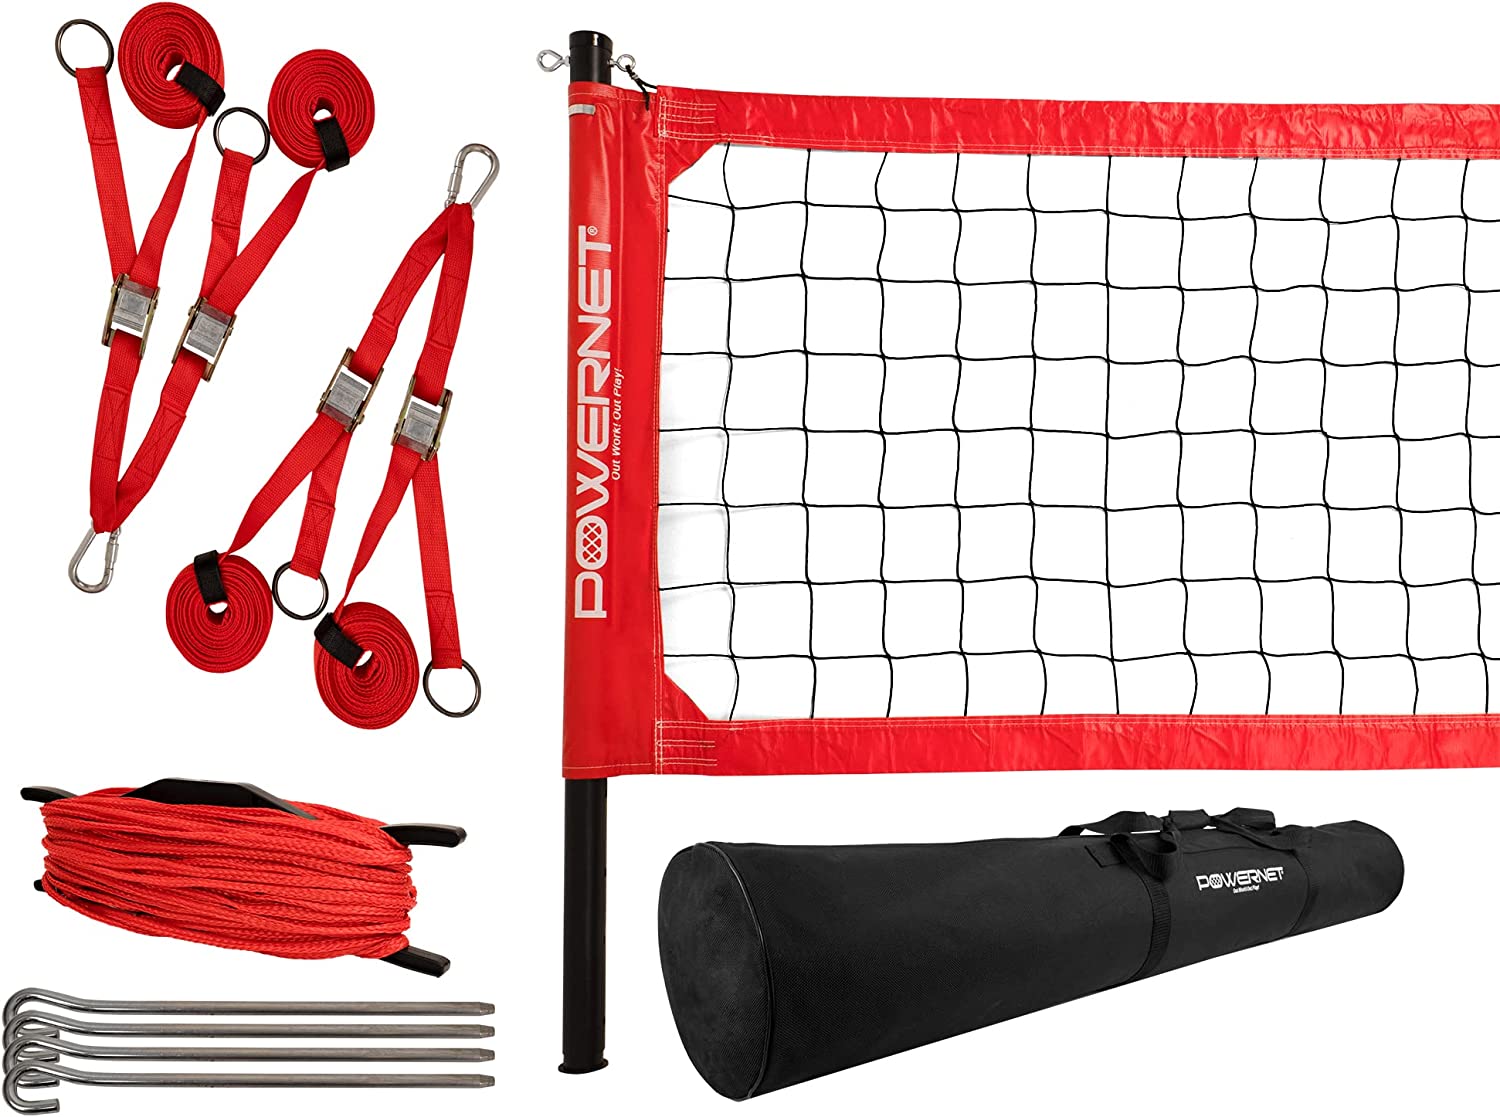 PowerNet Pro Volleyball Net